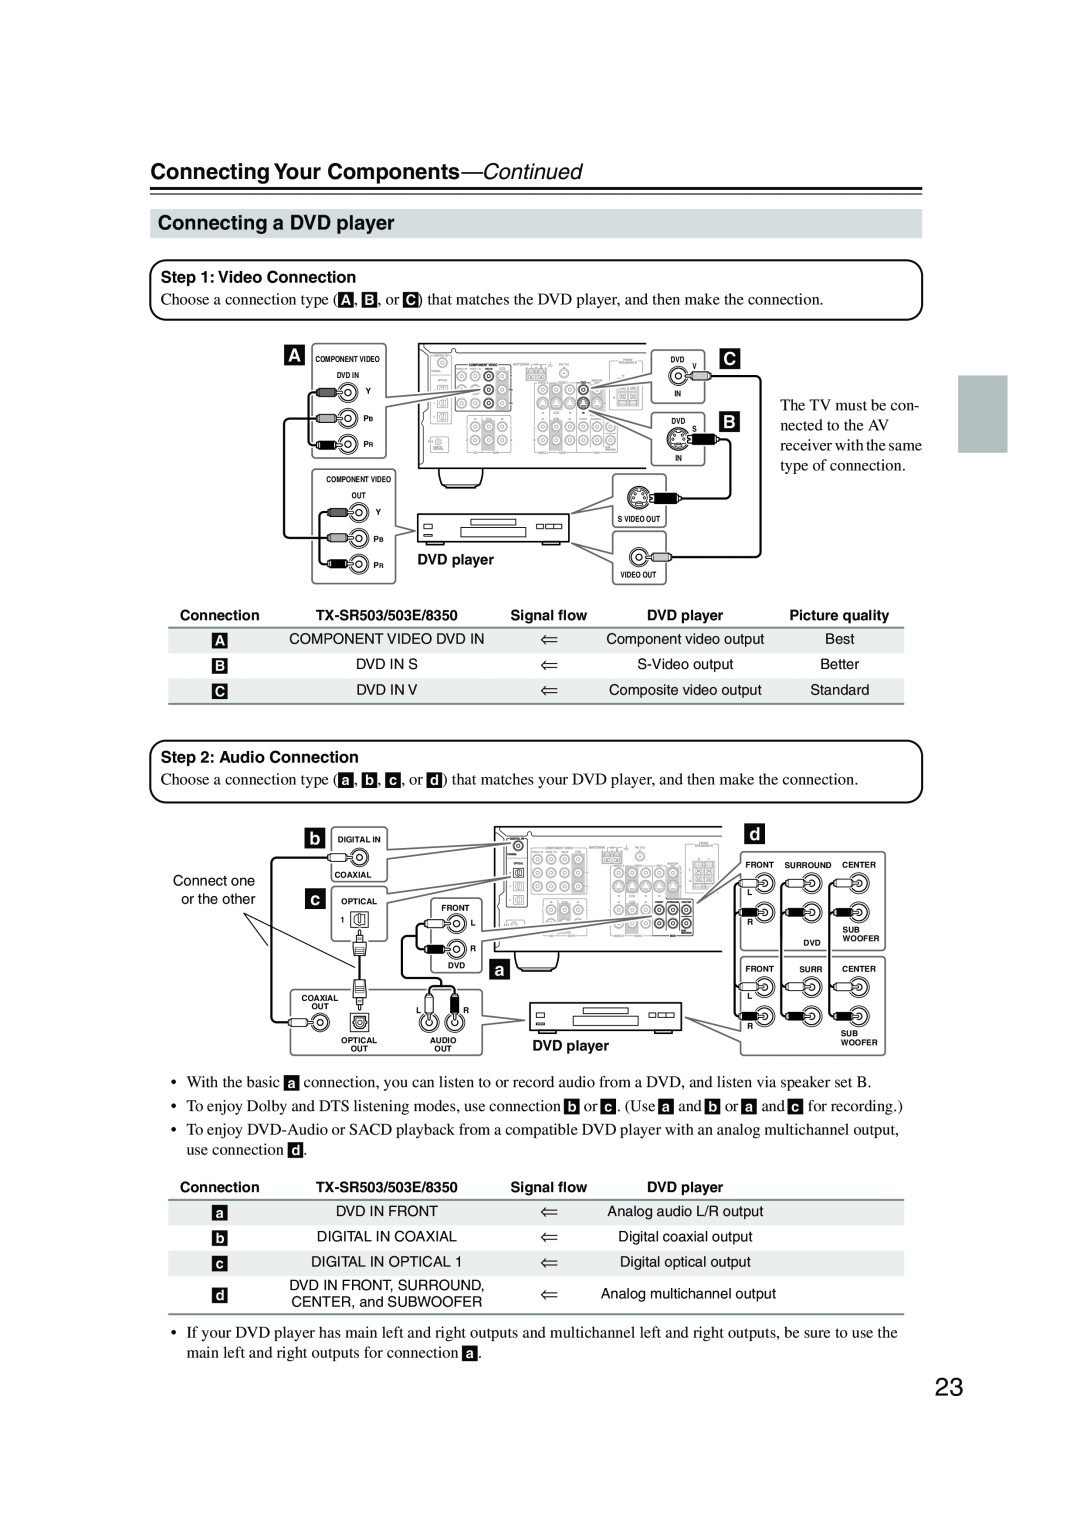 Onkyo TX-SR503E, TX-SR8350 instruction manual Connecting a DVD player, Connecting Your Components—Continued 